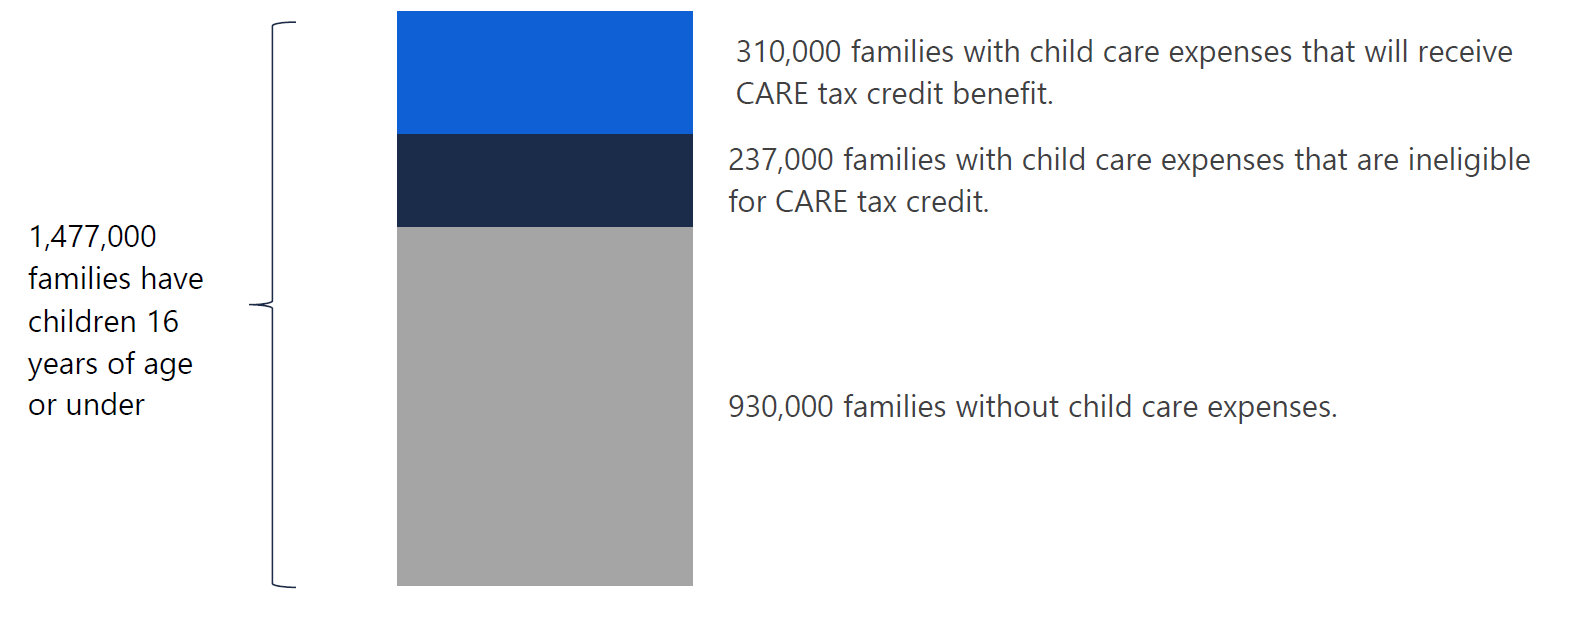 child-care-in-ontario-a-review-of-ontario-s-new-child-care-tax-credit